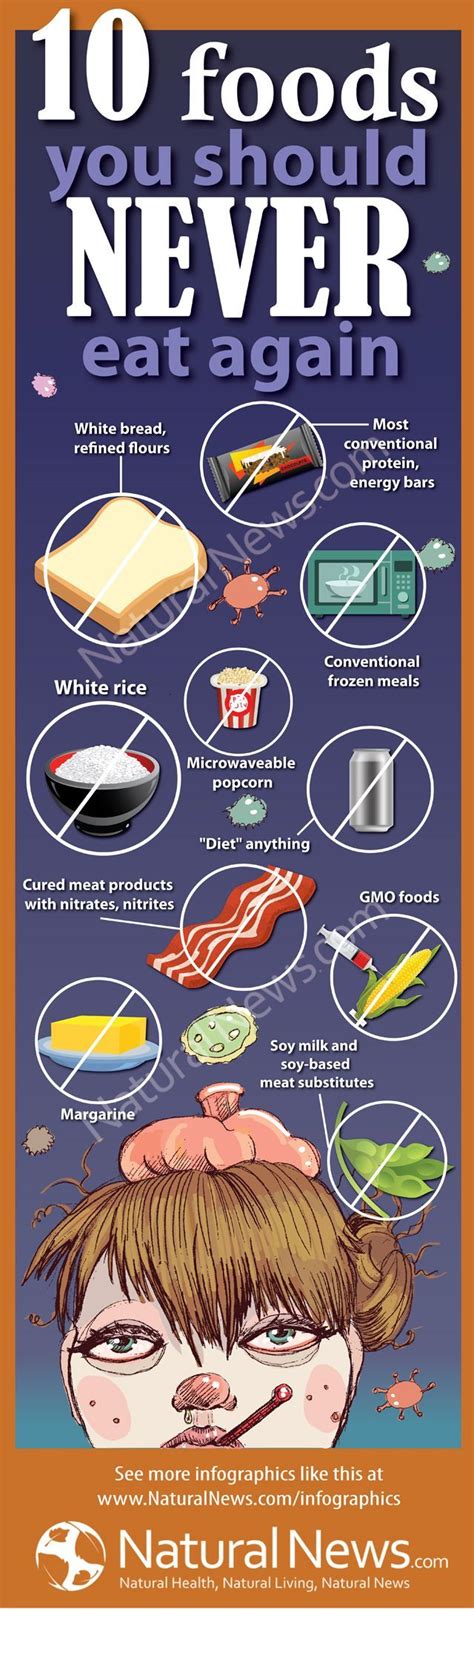 foods you should never eat again infographic sexiezpicz web porn